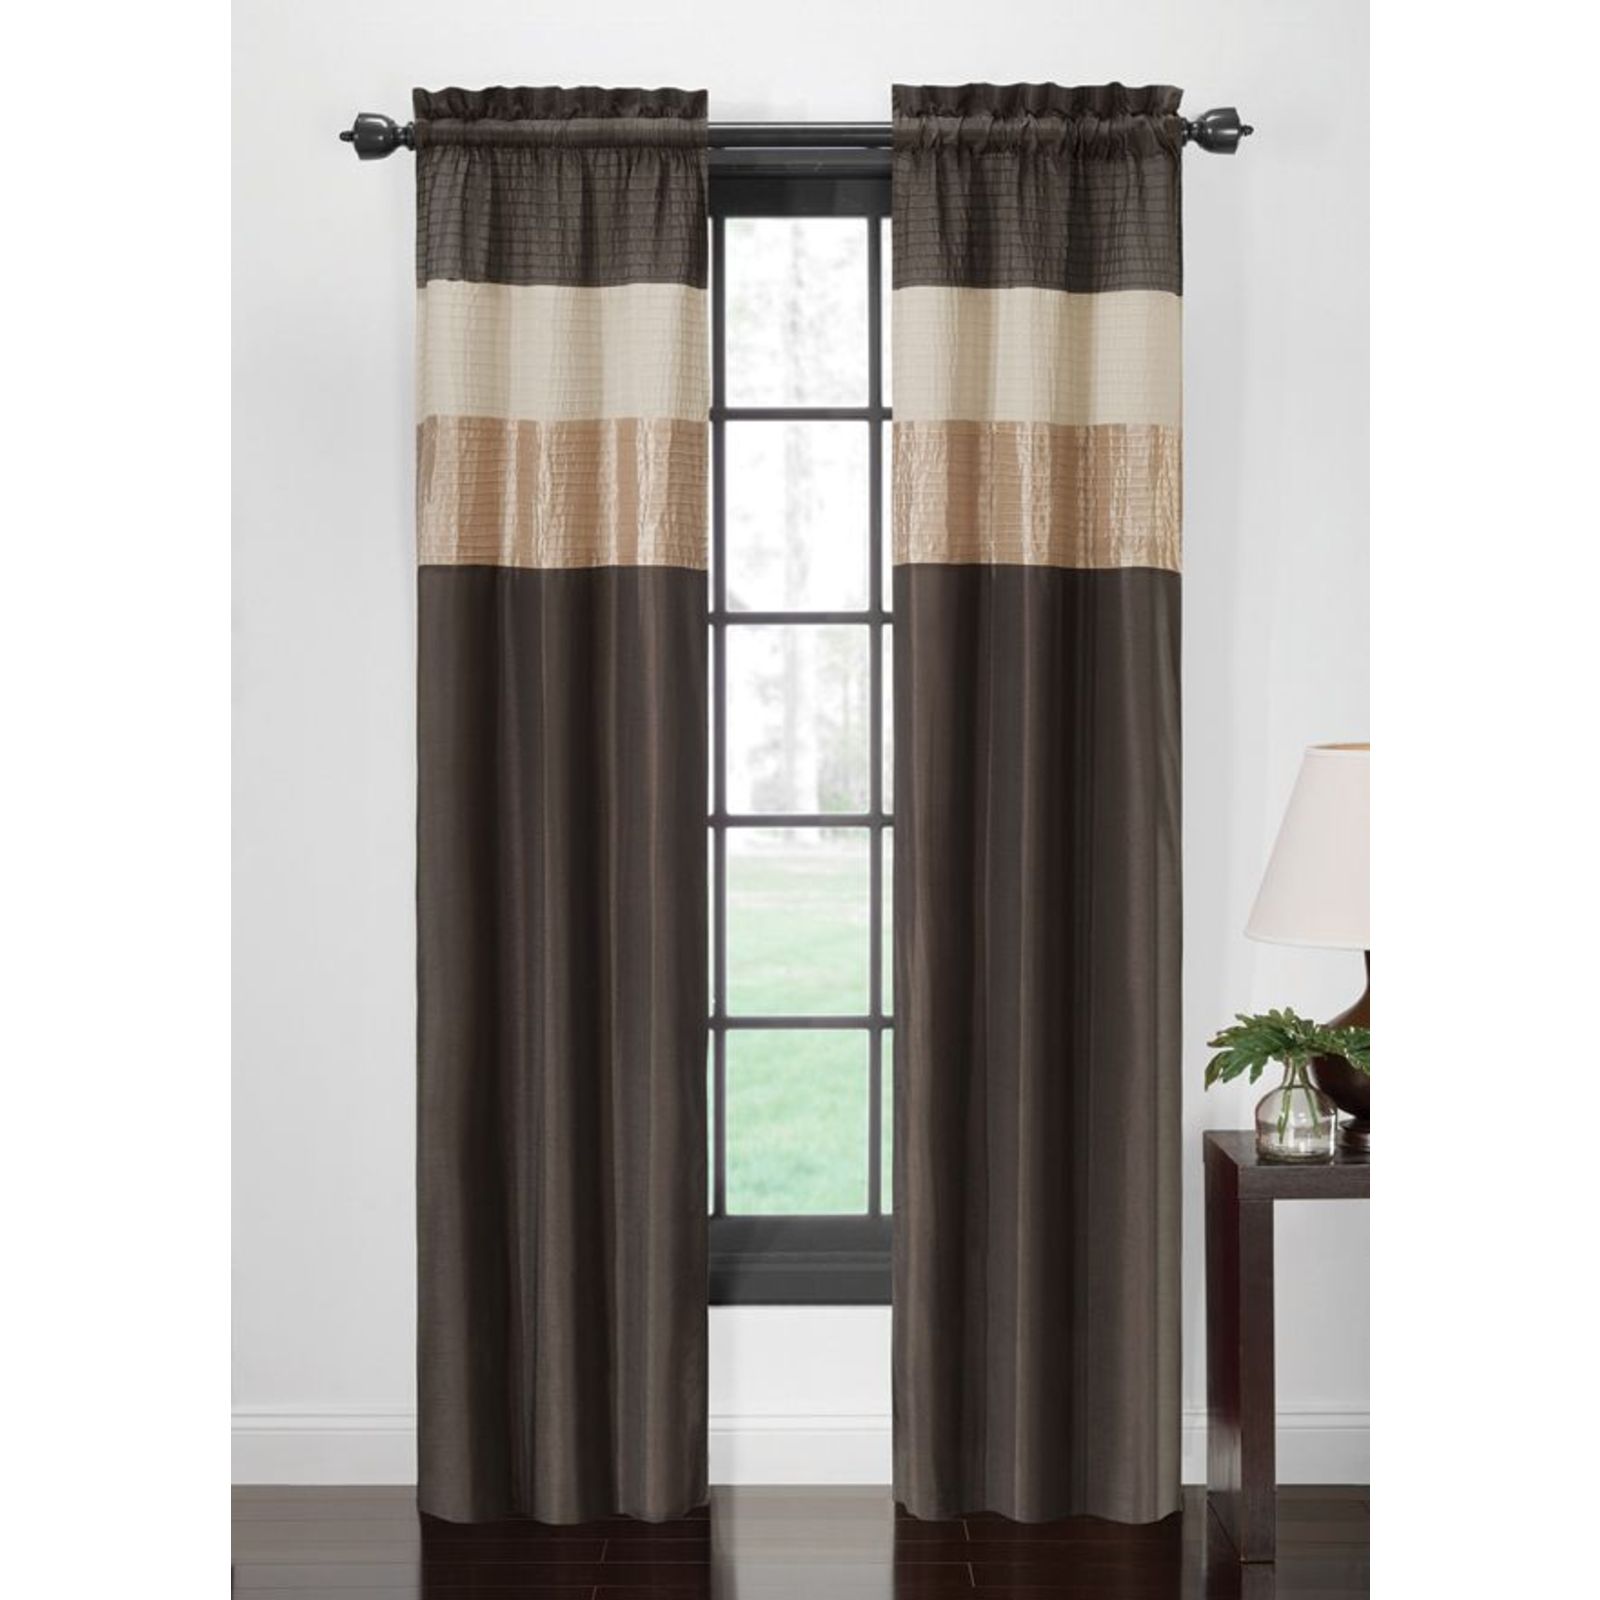 The Great Find Stripe Window Panel - Chocolate